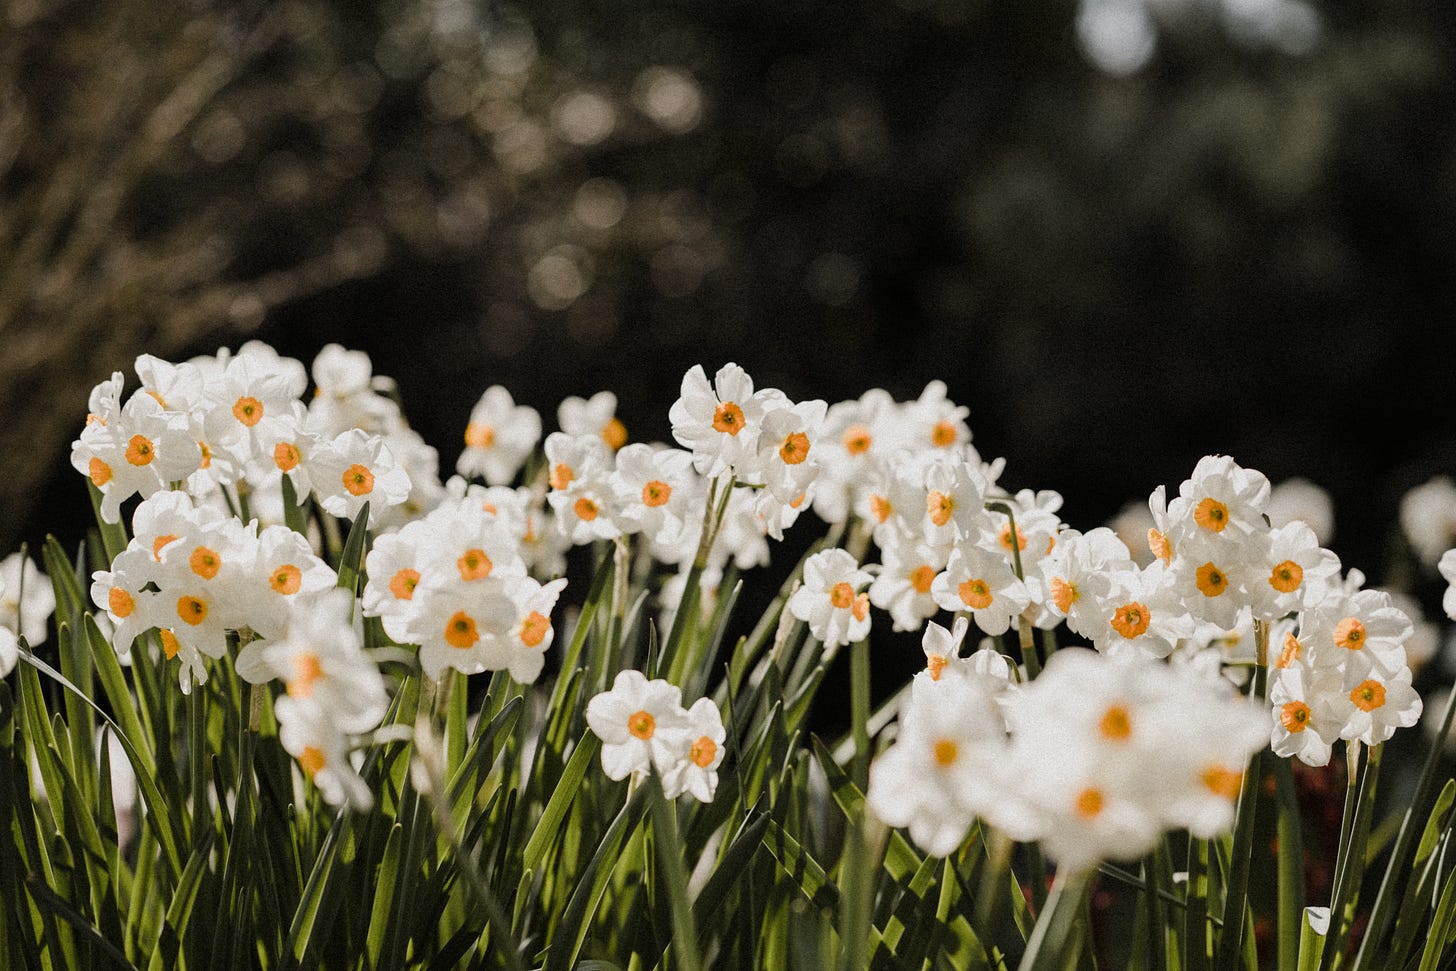 photo - a bank of small white daffodils with yellow trumpets